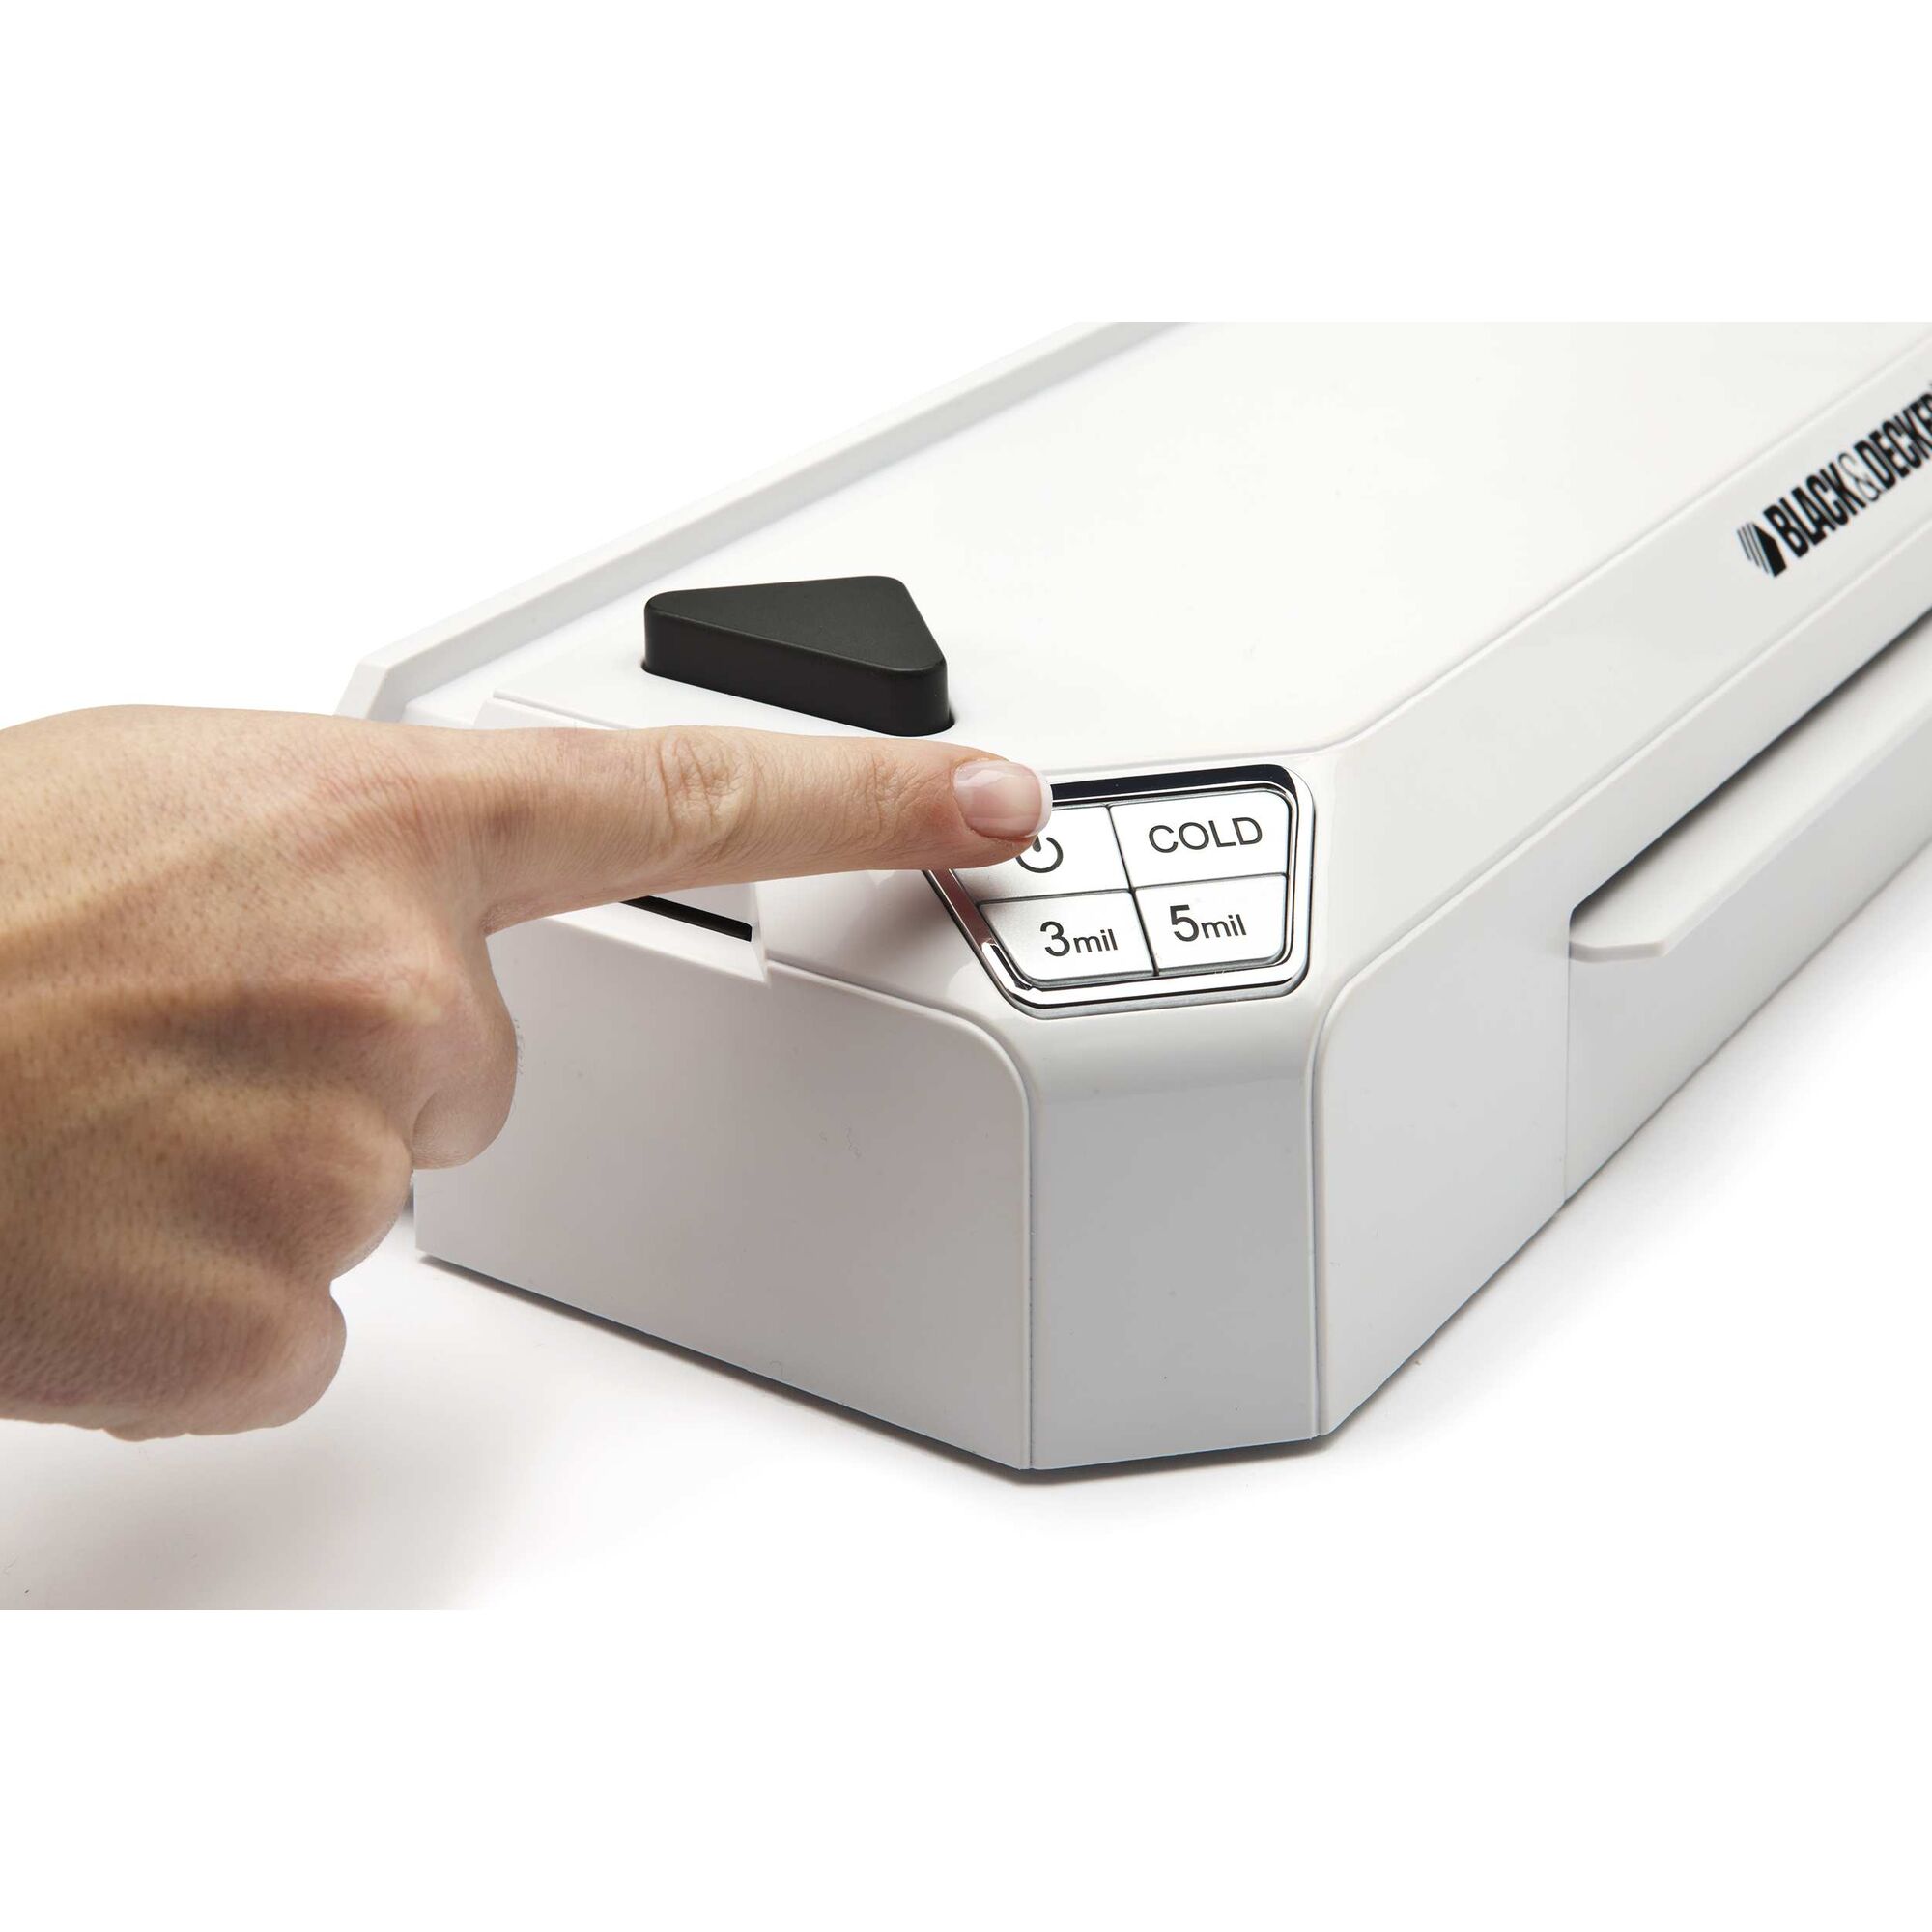 Flash 9.5 inch thermal laminator being turned on by a person.